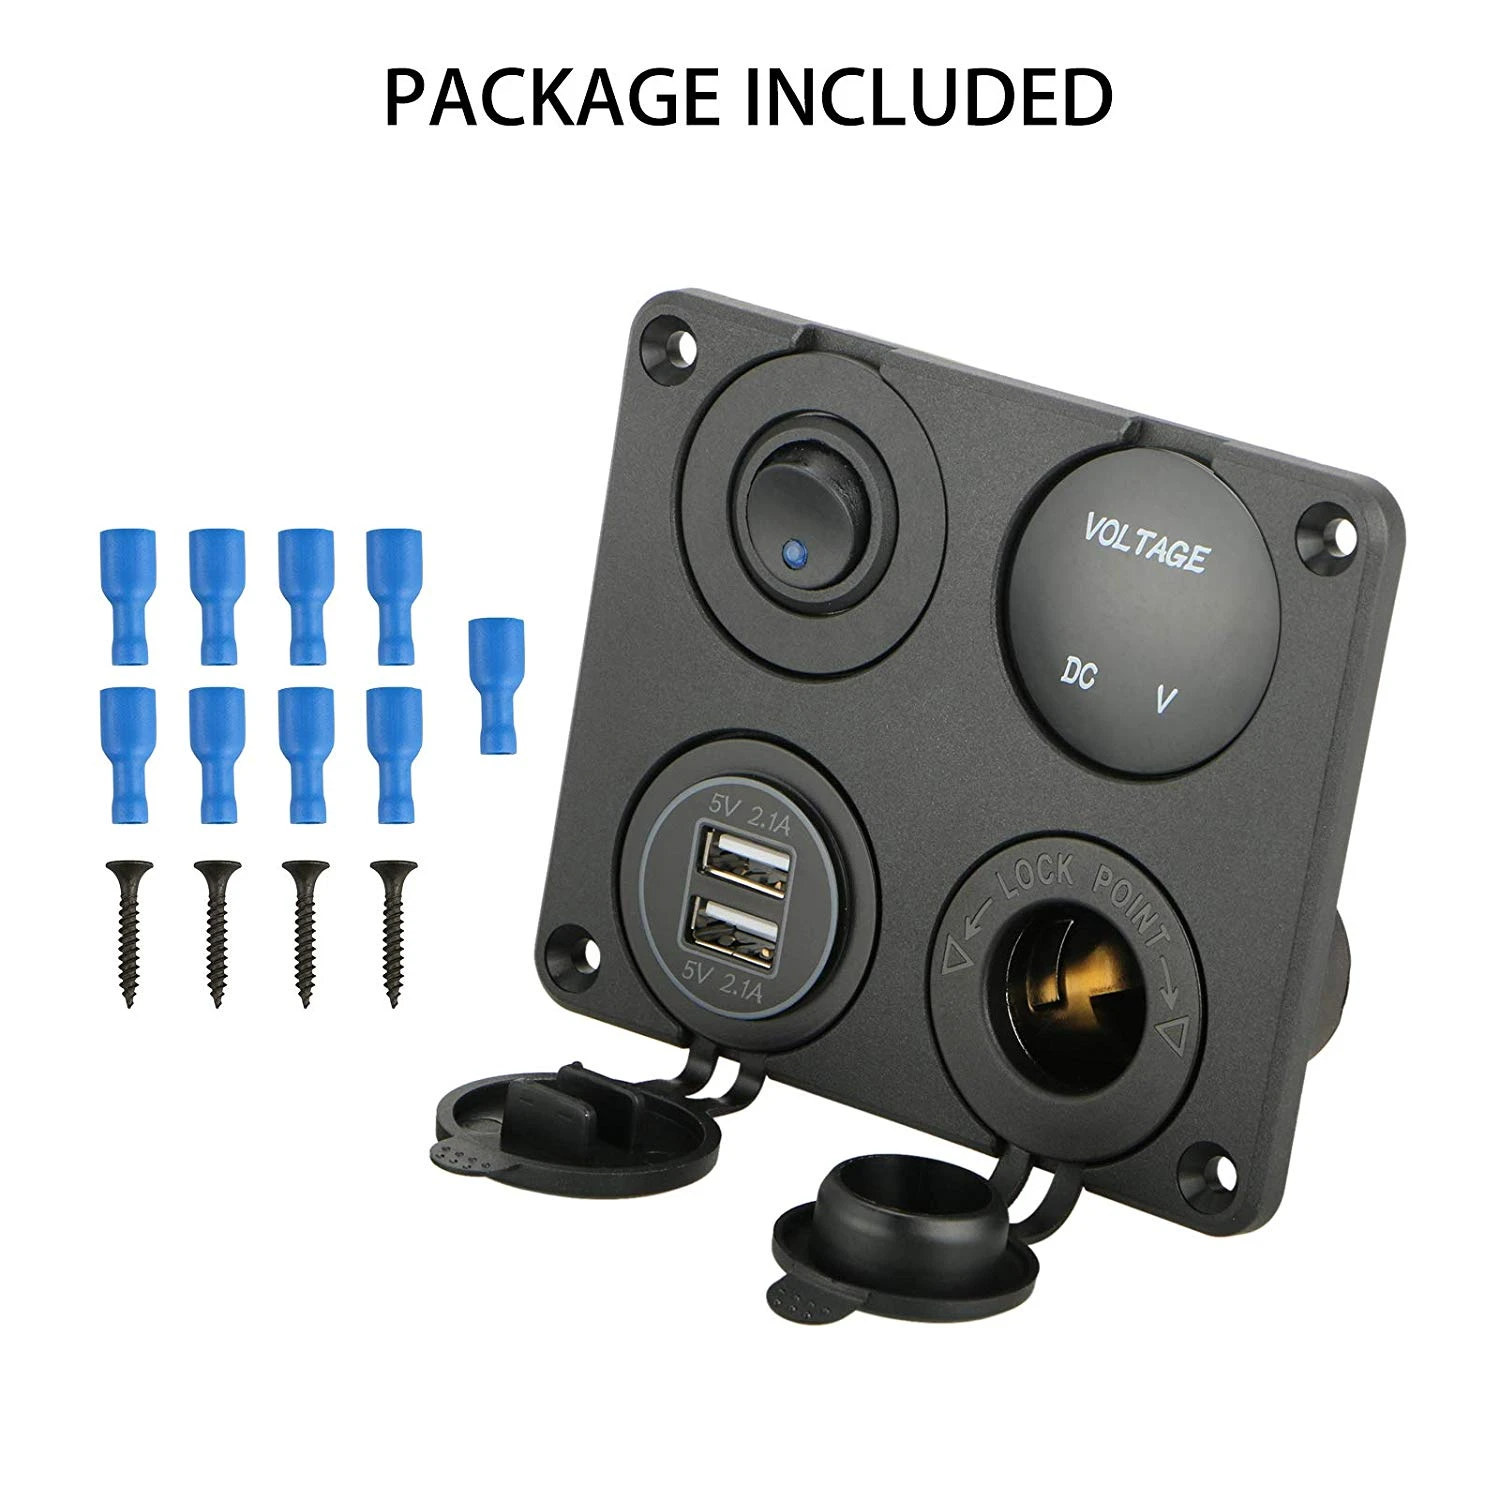 4 in 1 Waterproof Boat Cell Phone Rocker Switch Panel with 12 Volt Dual USB Power Outlet Cigarette Lighter Socket